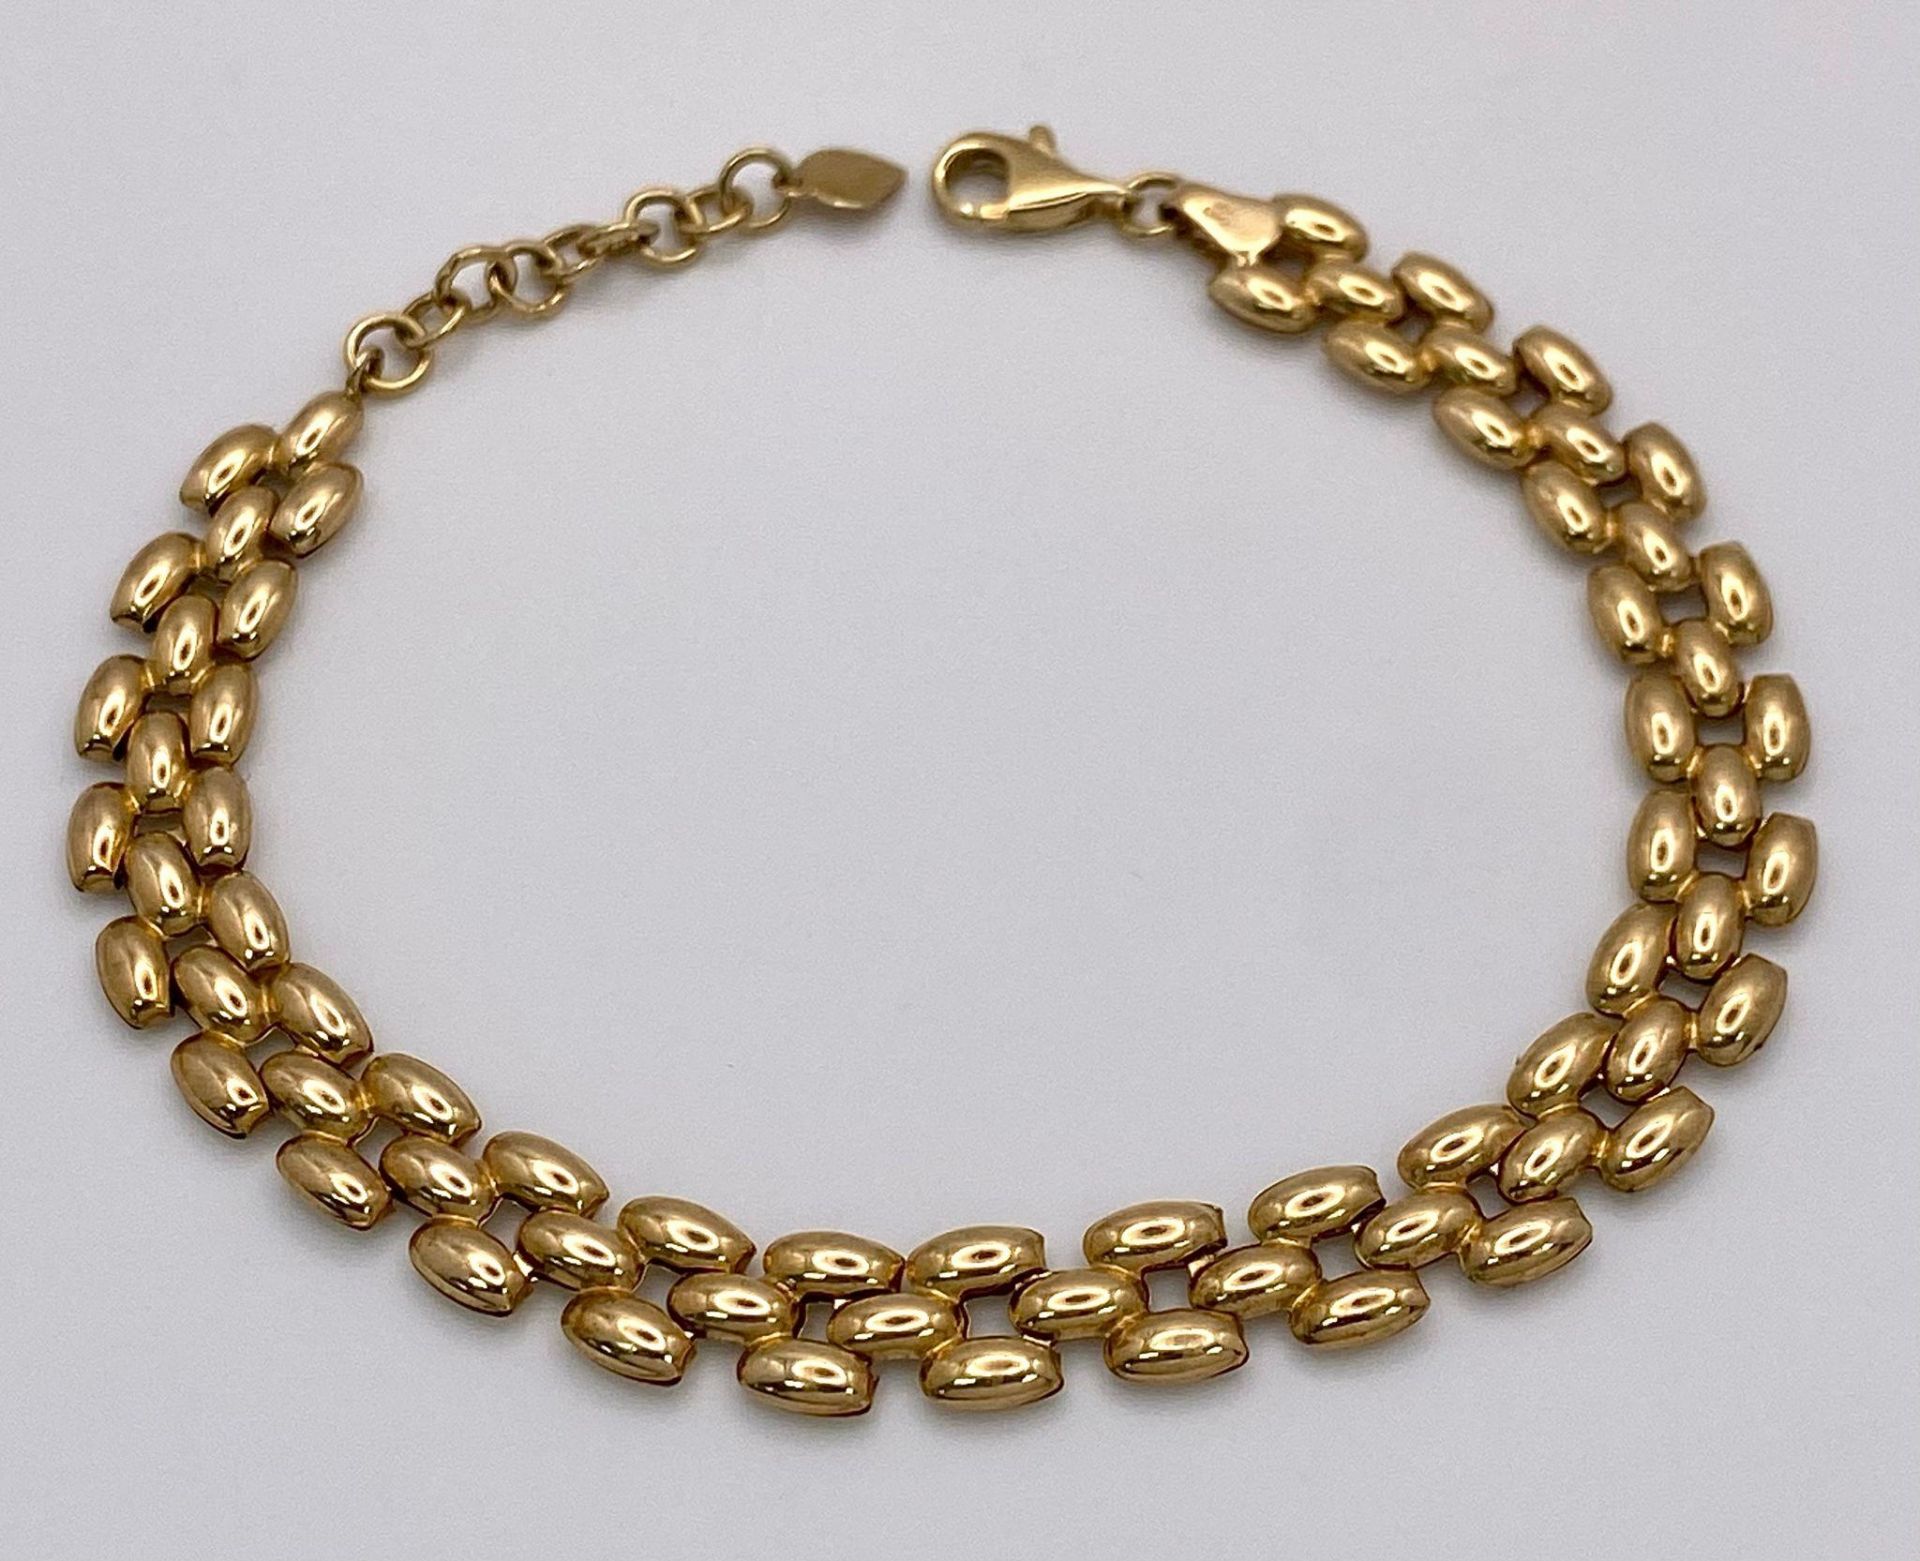 A 9K Yellow Gold Three-Row Link Bracelet. 18cm. 4.5g weight - Image 2 of 4